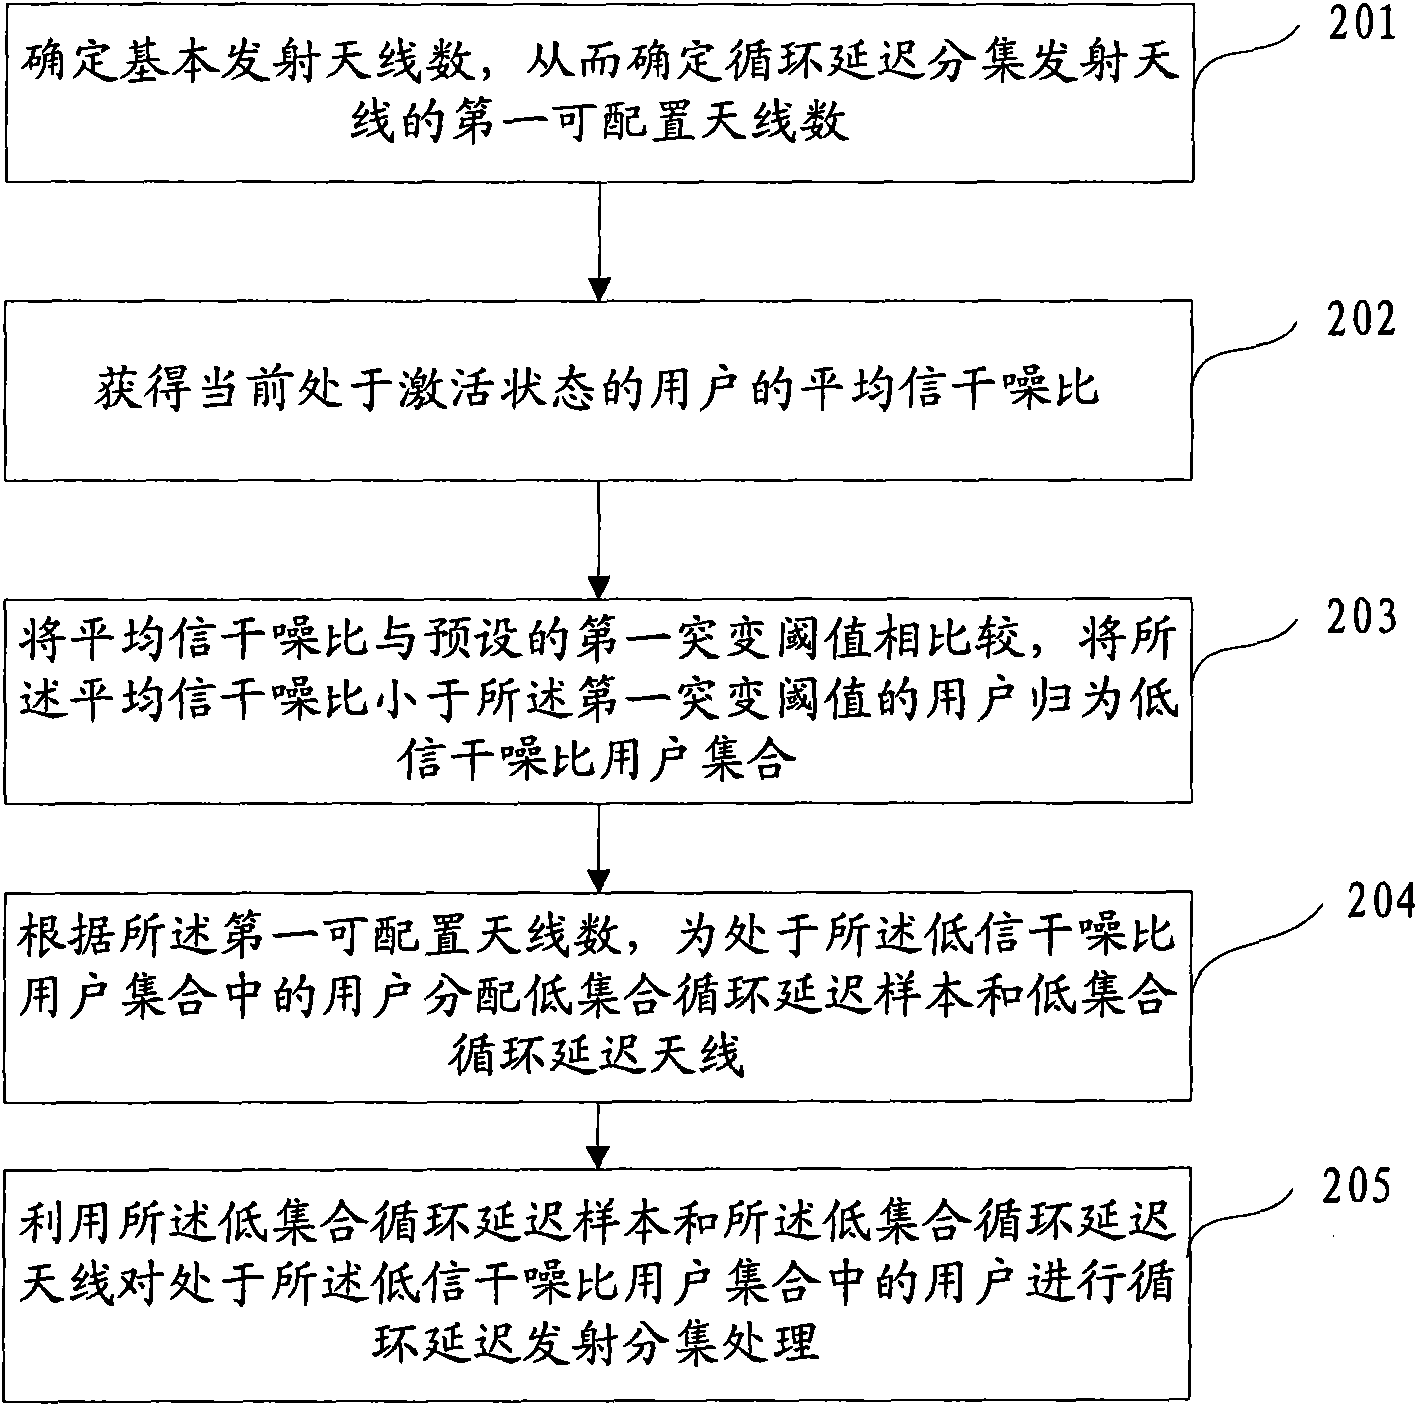 Multiuser scheduling method, base station and user receiving device